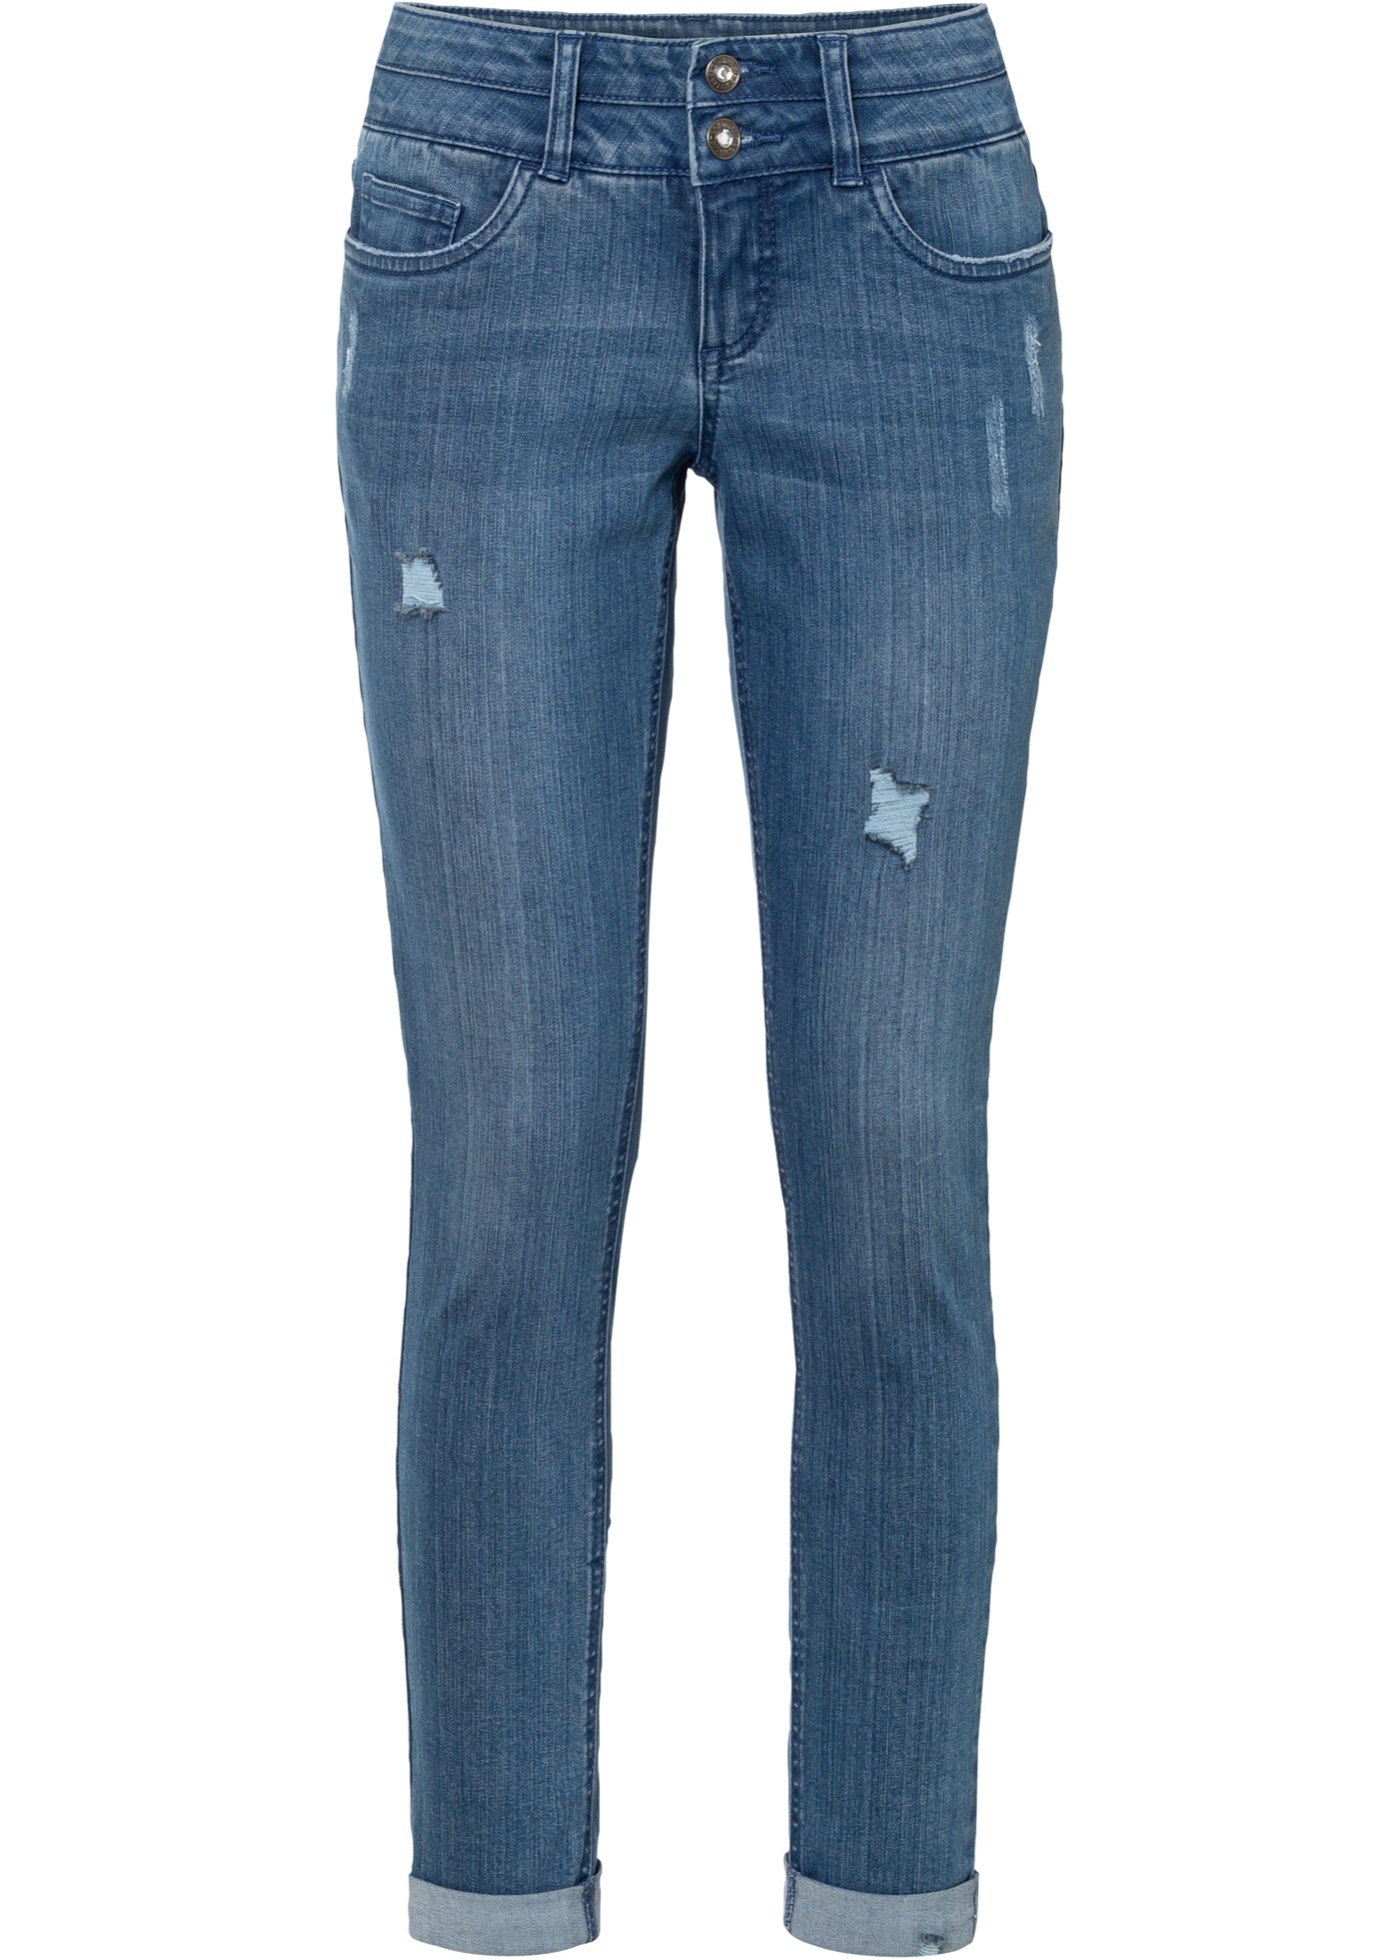 Jeans met gerecycled polyester